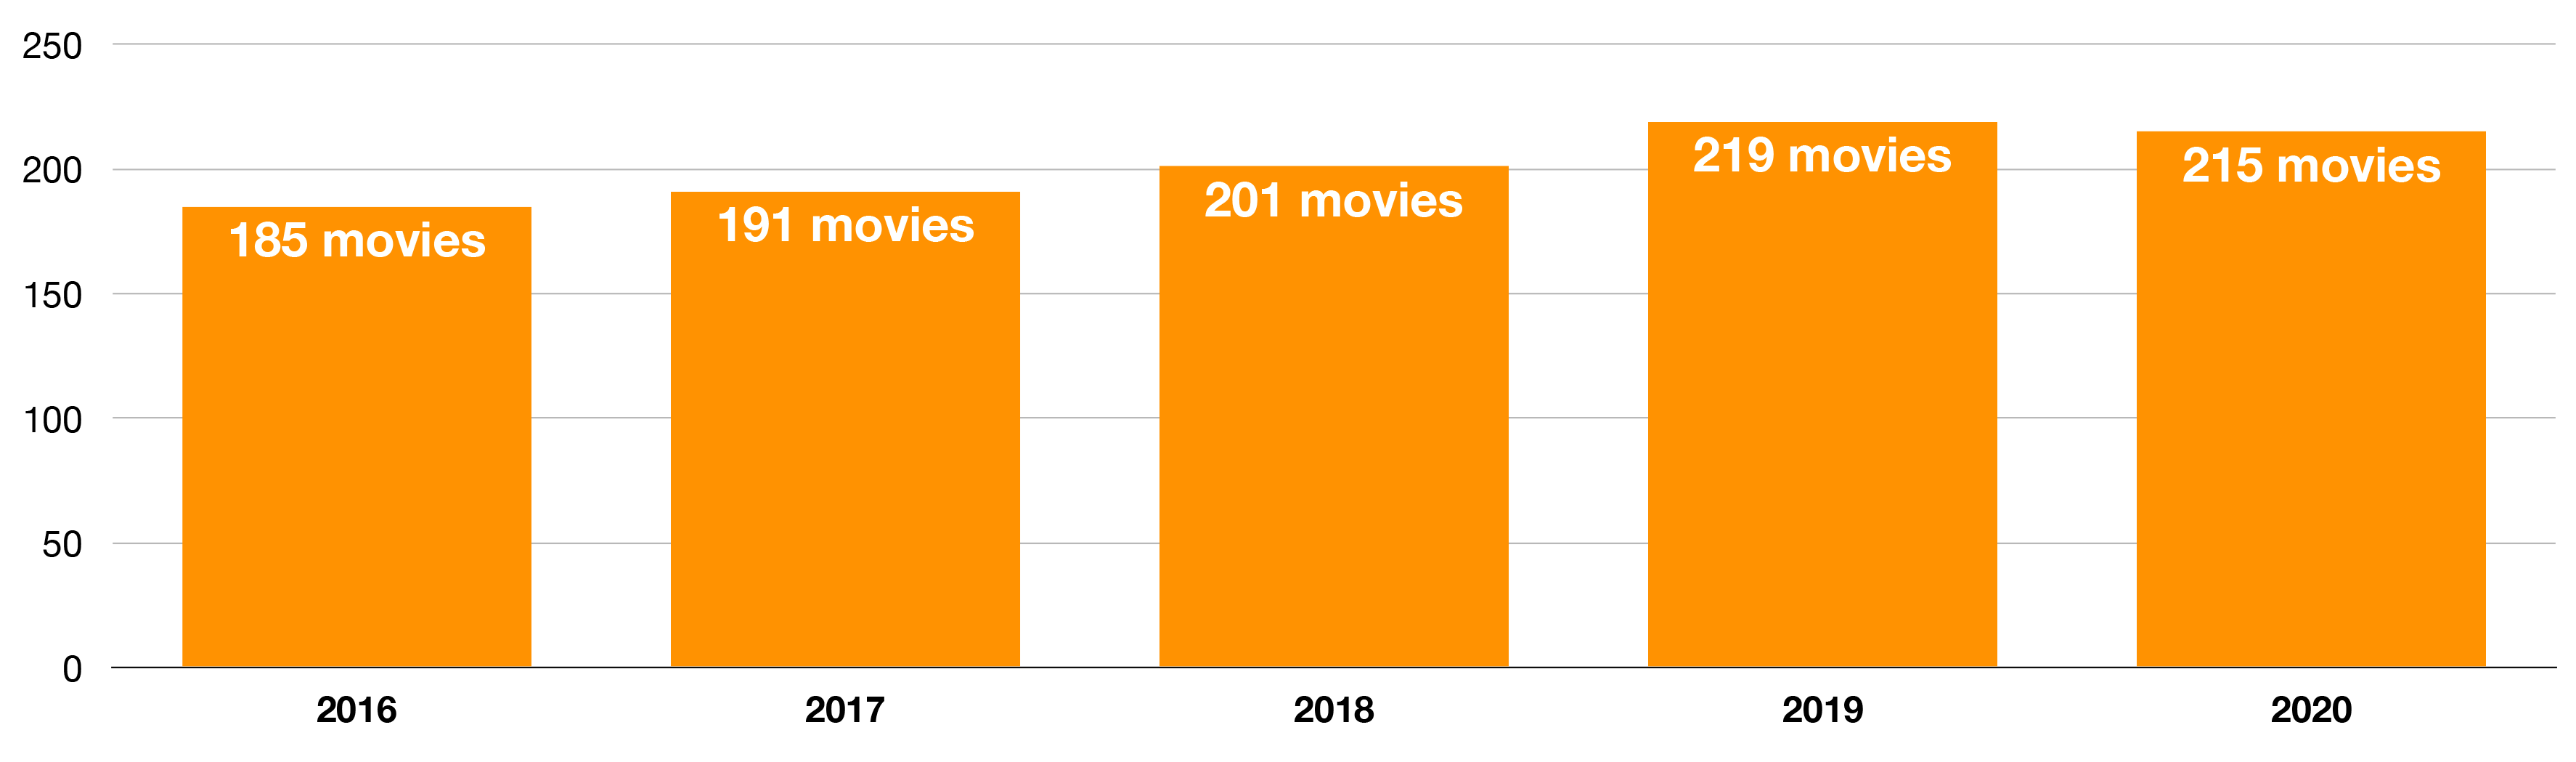 Chart of Yearly Movie Consumption, 2020